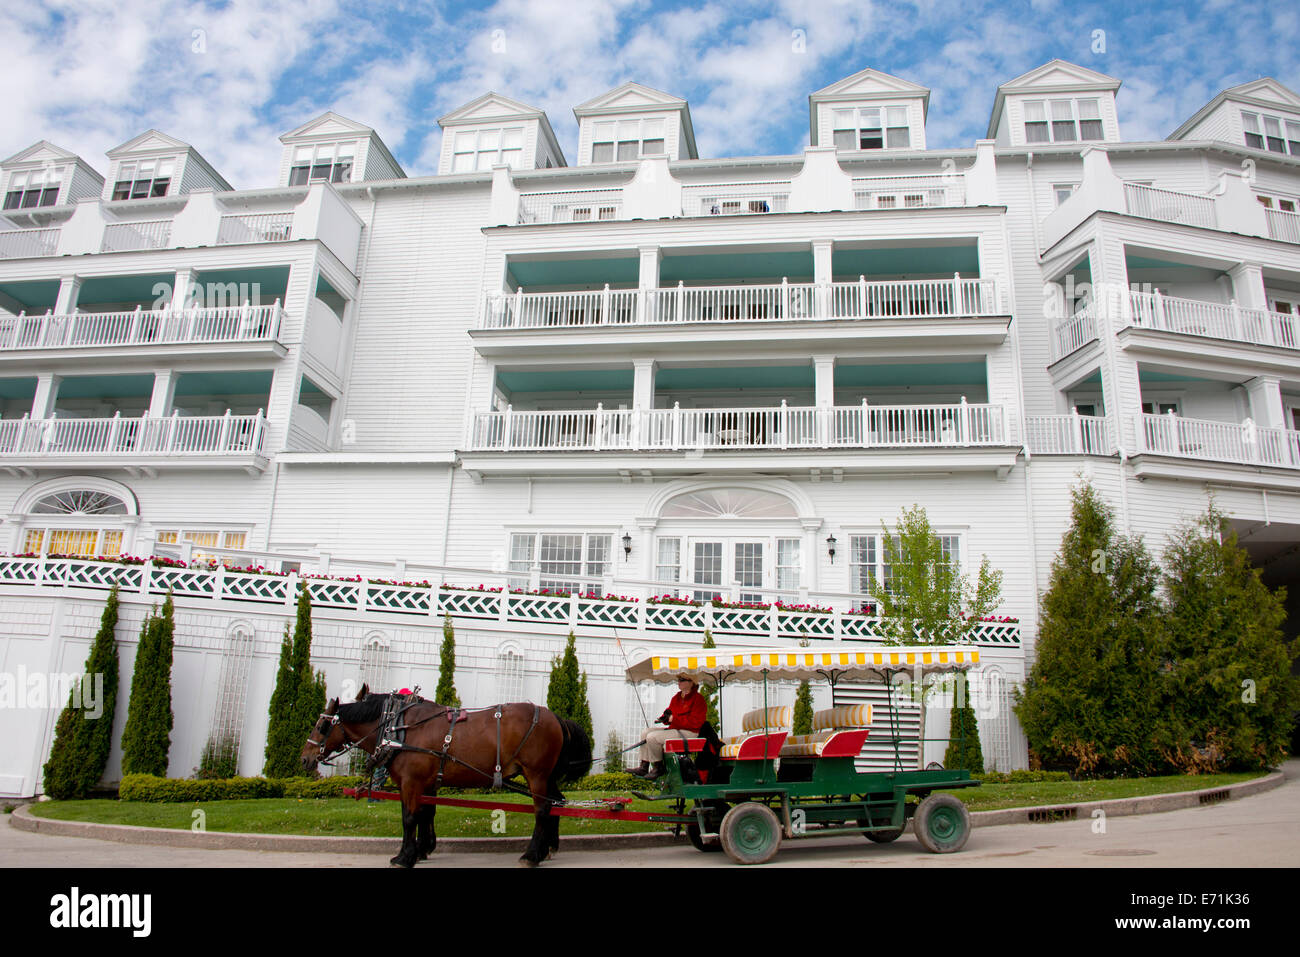 USA, Michigan, Mackinac Island. Traditional horse carriage in front of the historic landmark Grand Hotel. Stock Photo